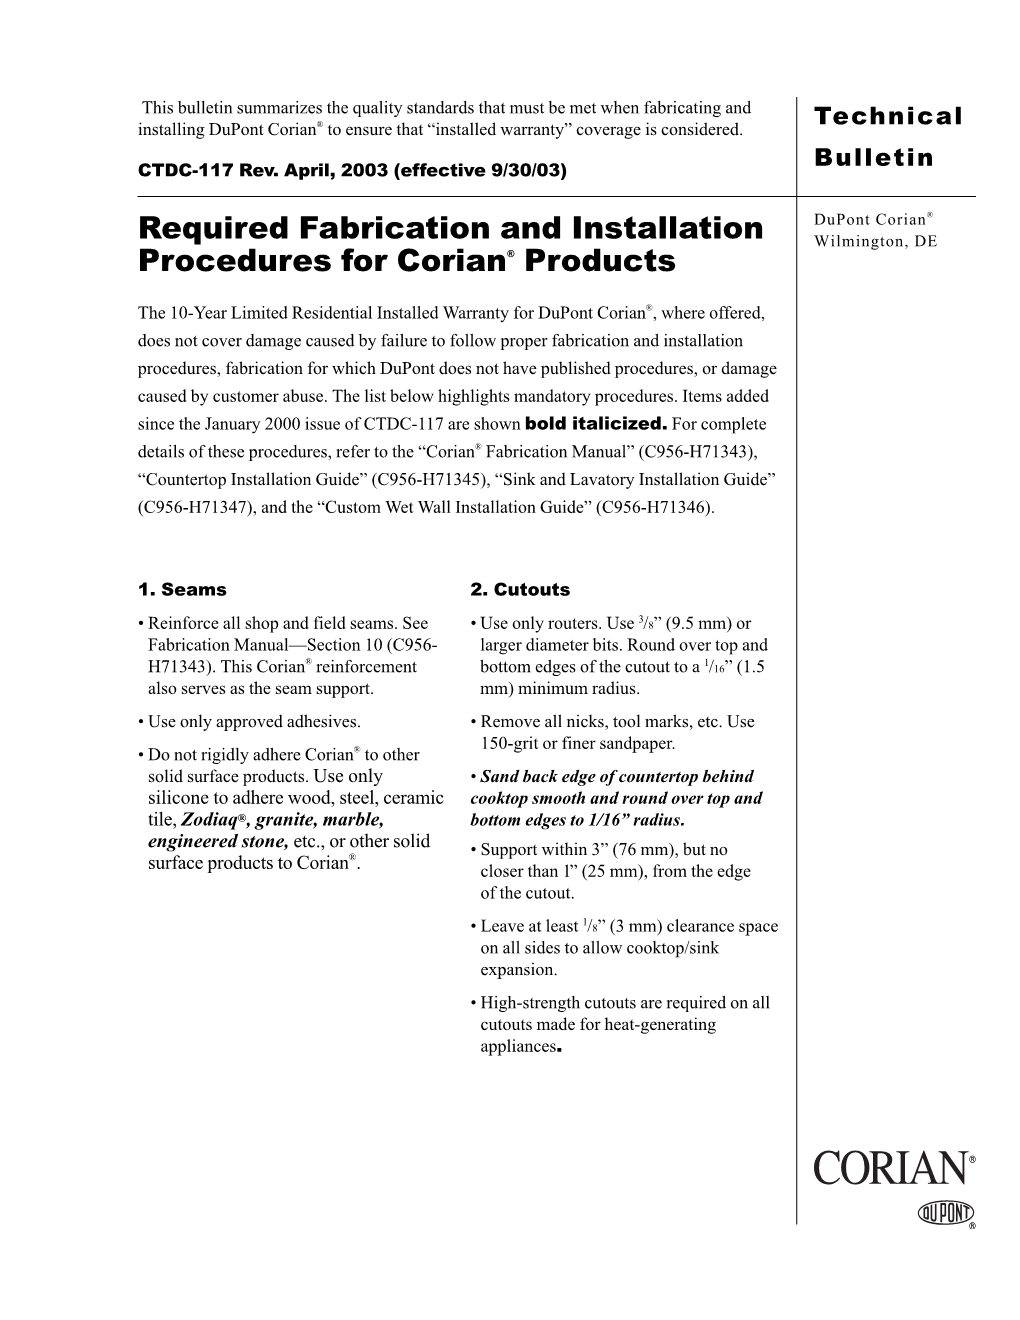 CTDC-117 – Required Fabrication & Installation Procedures for Corian